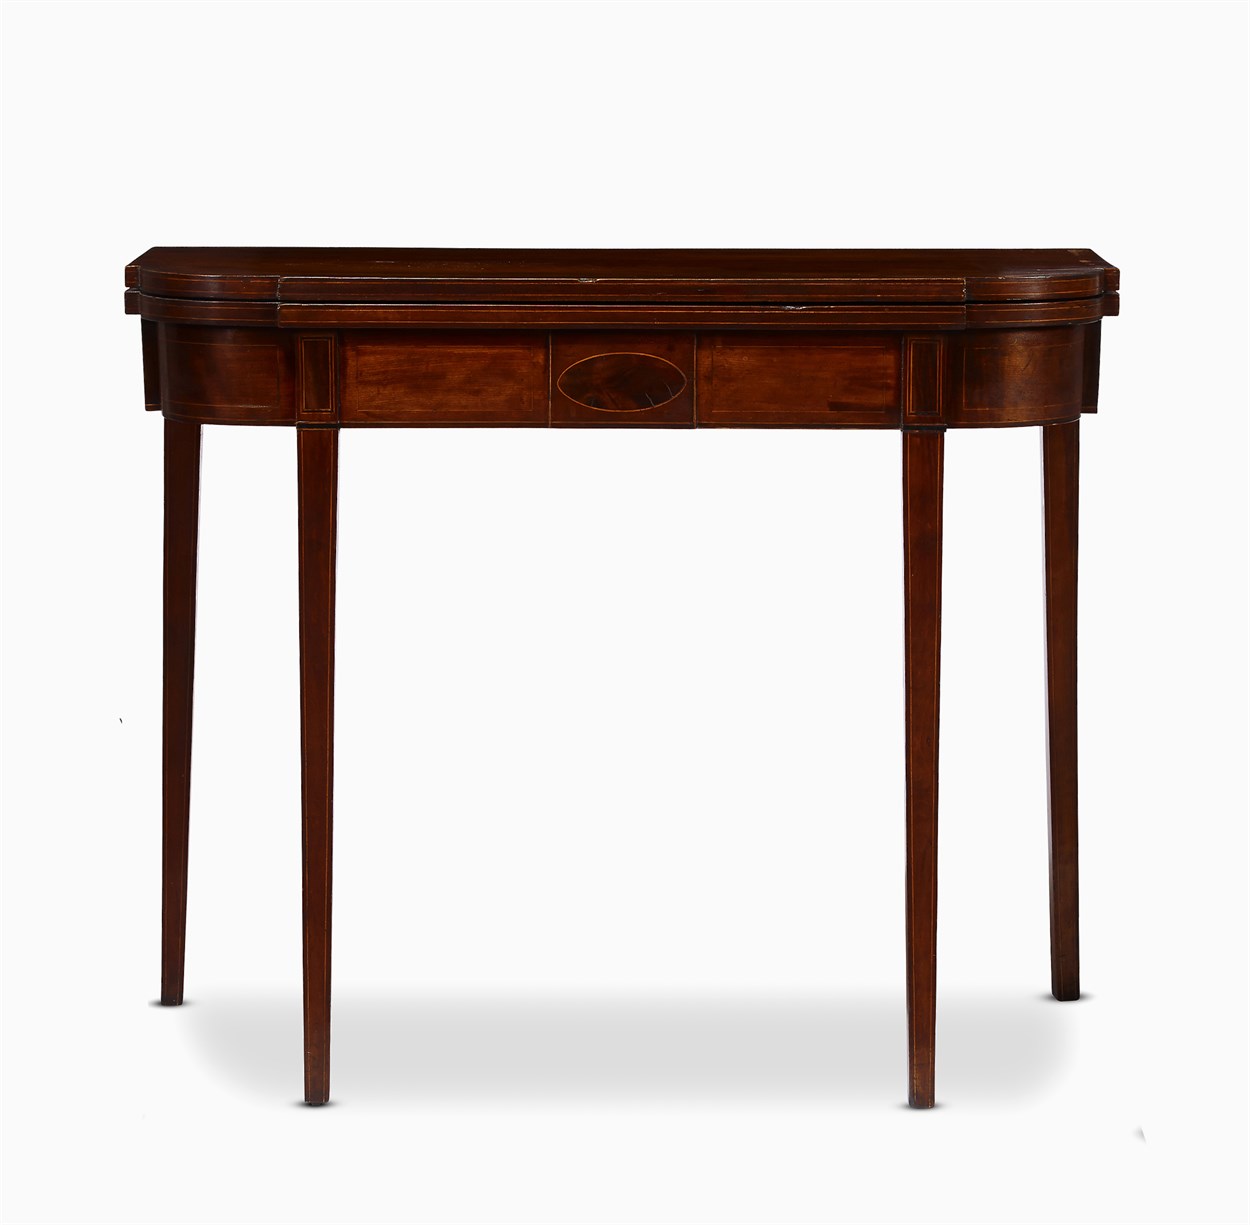 Lot 25 - Federal string-inlaid cherrywood card table with ovolo corners